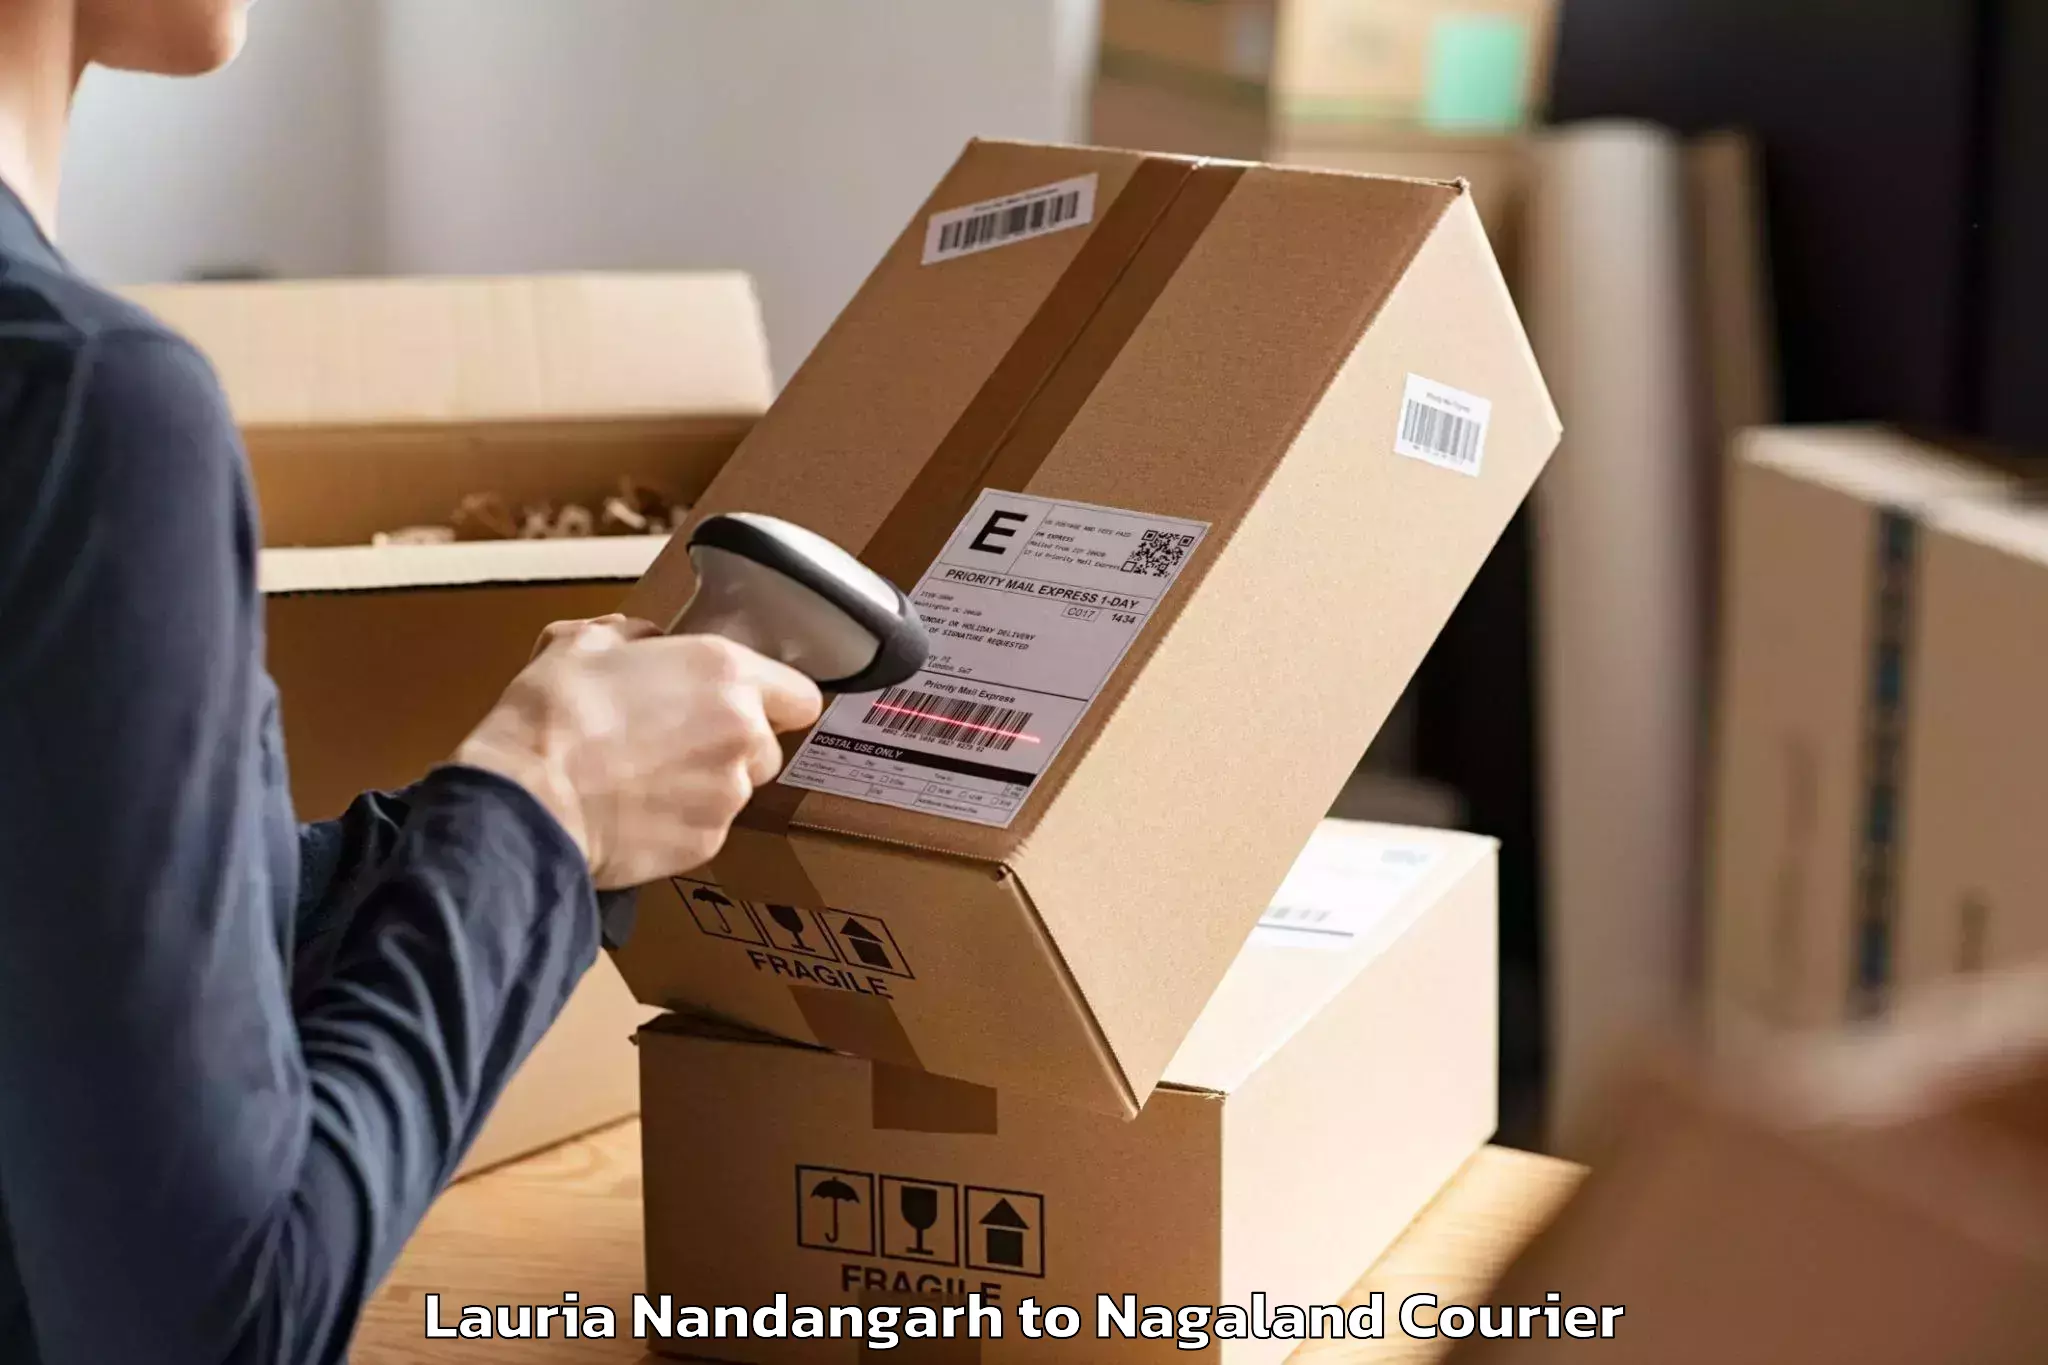 Trusted moving company Lauria Nandangarh to Nagaland